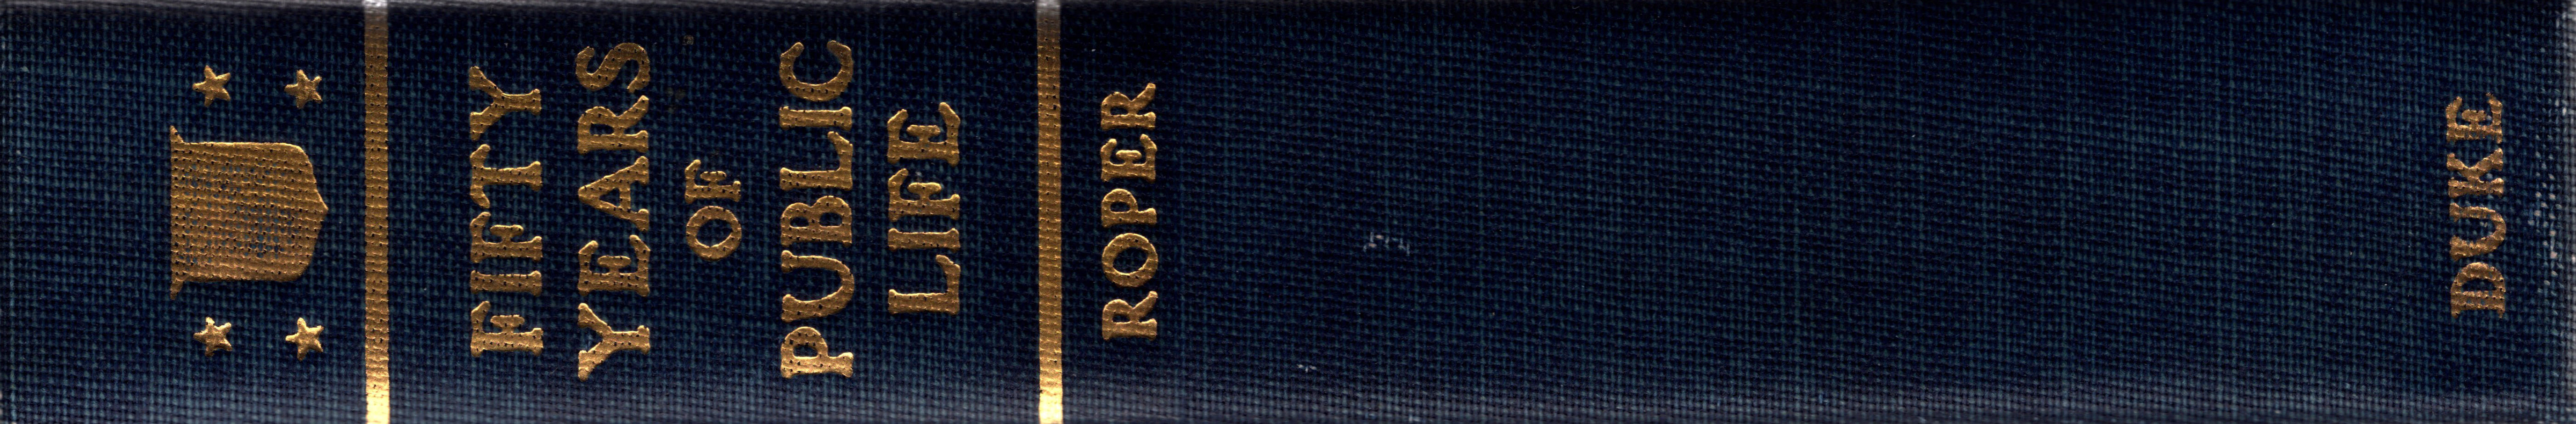 A high-quality, color image of the spine of Daniel C. Roper's 